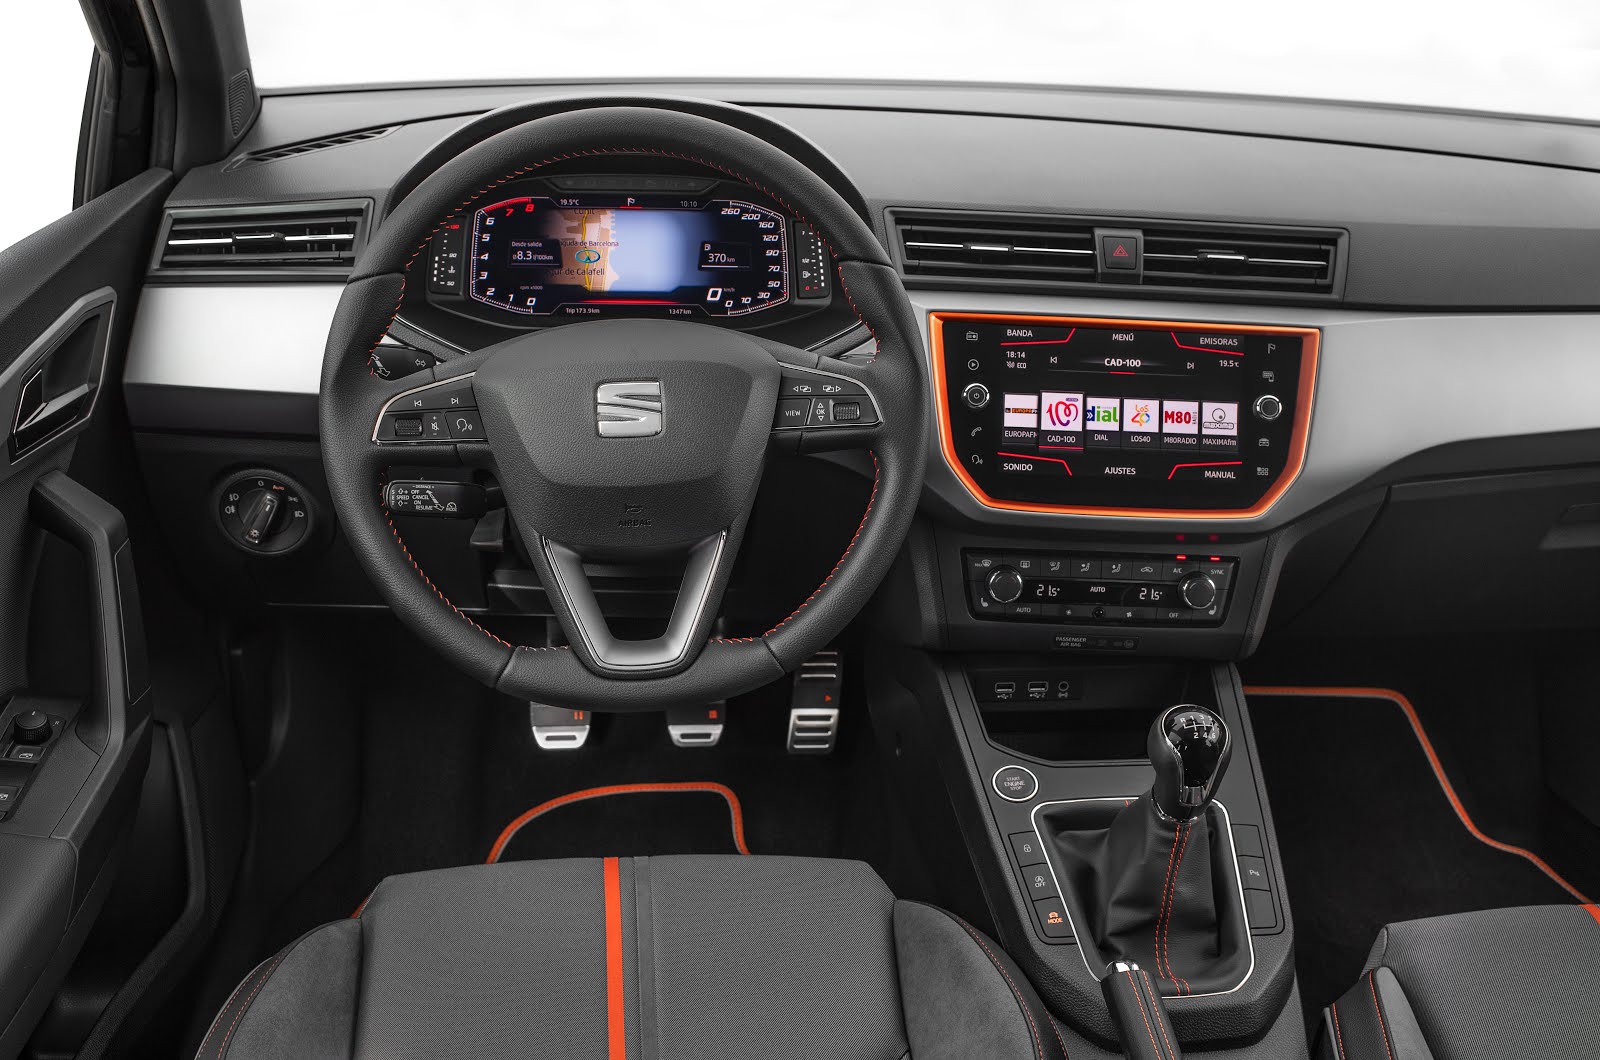 SEAT Introduces Its Digital Cockpit To The Arona And Ibiza 007 HQ 